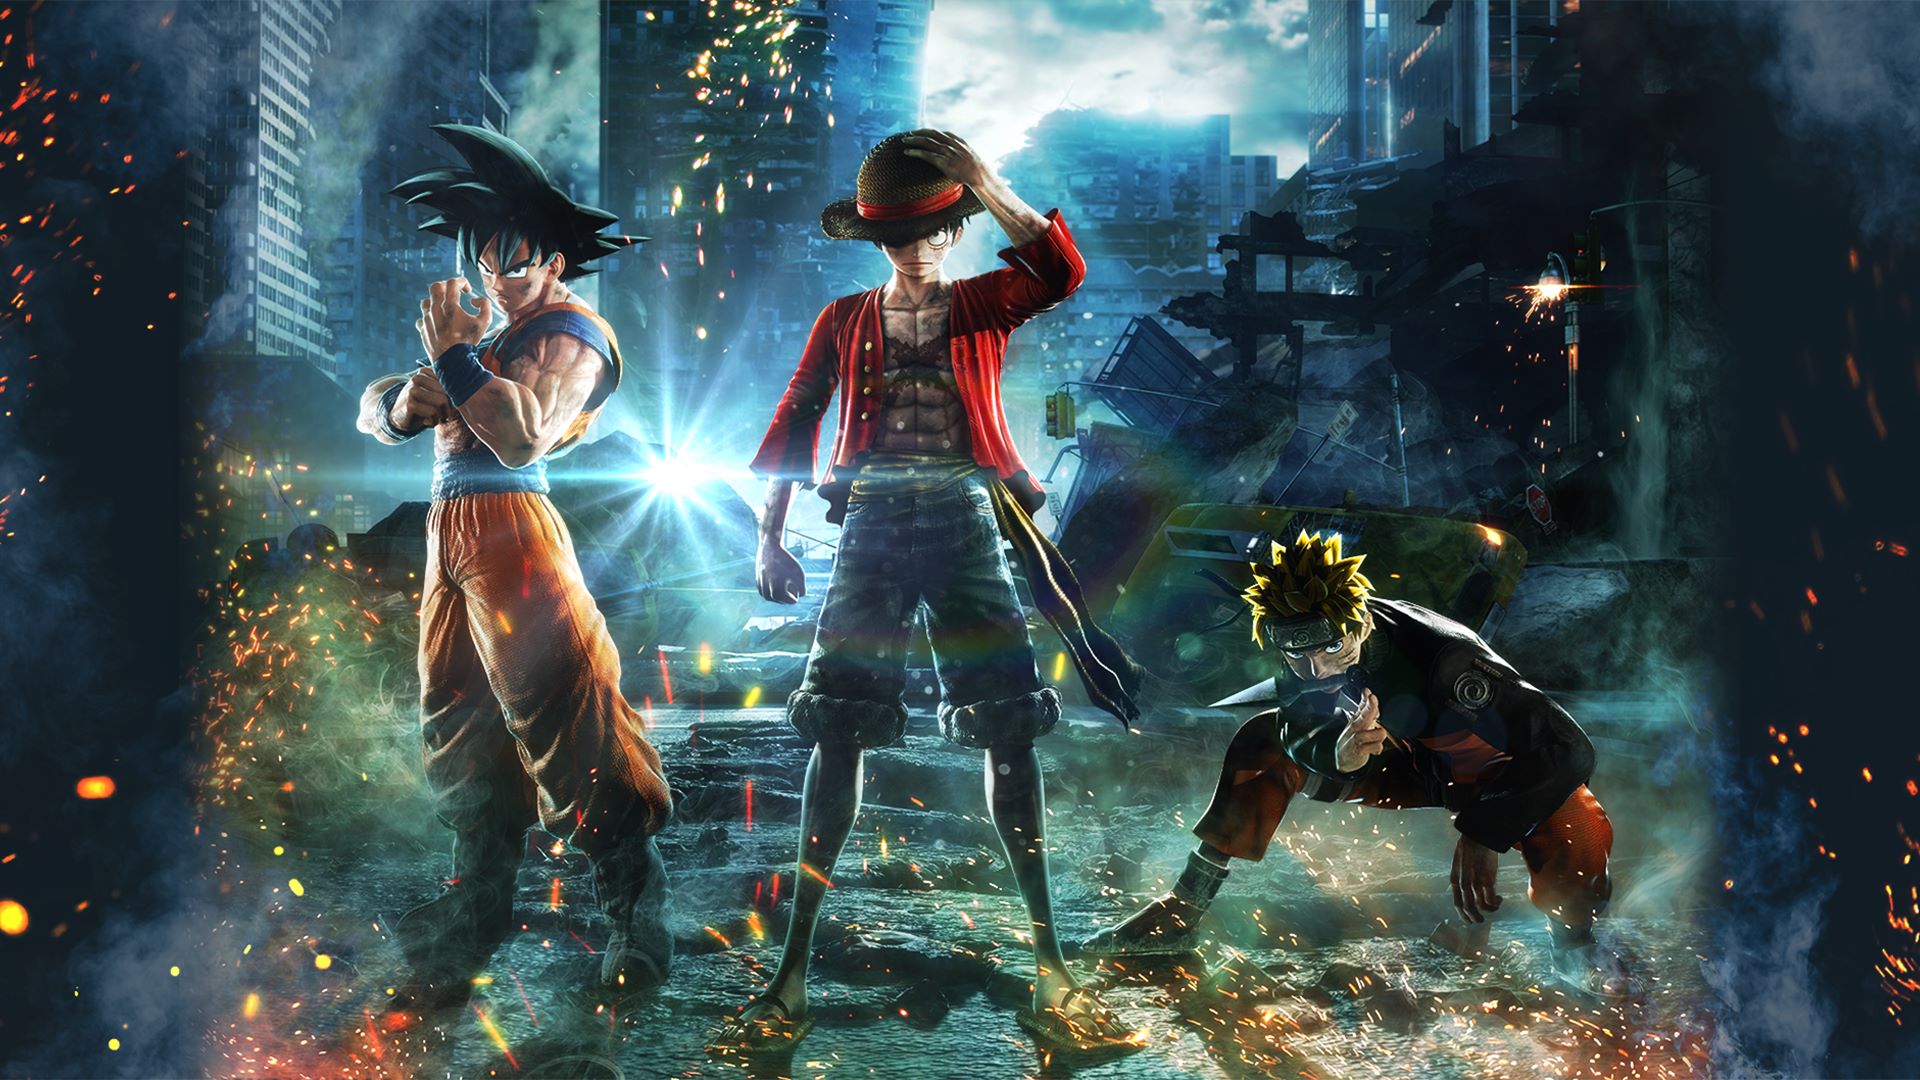 About Jump Force